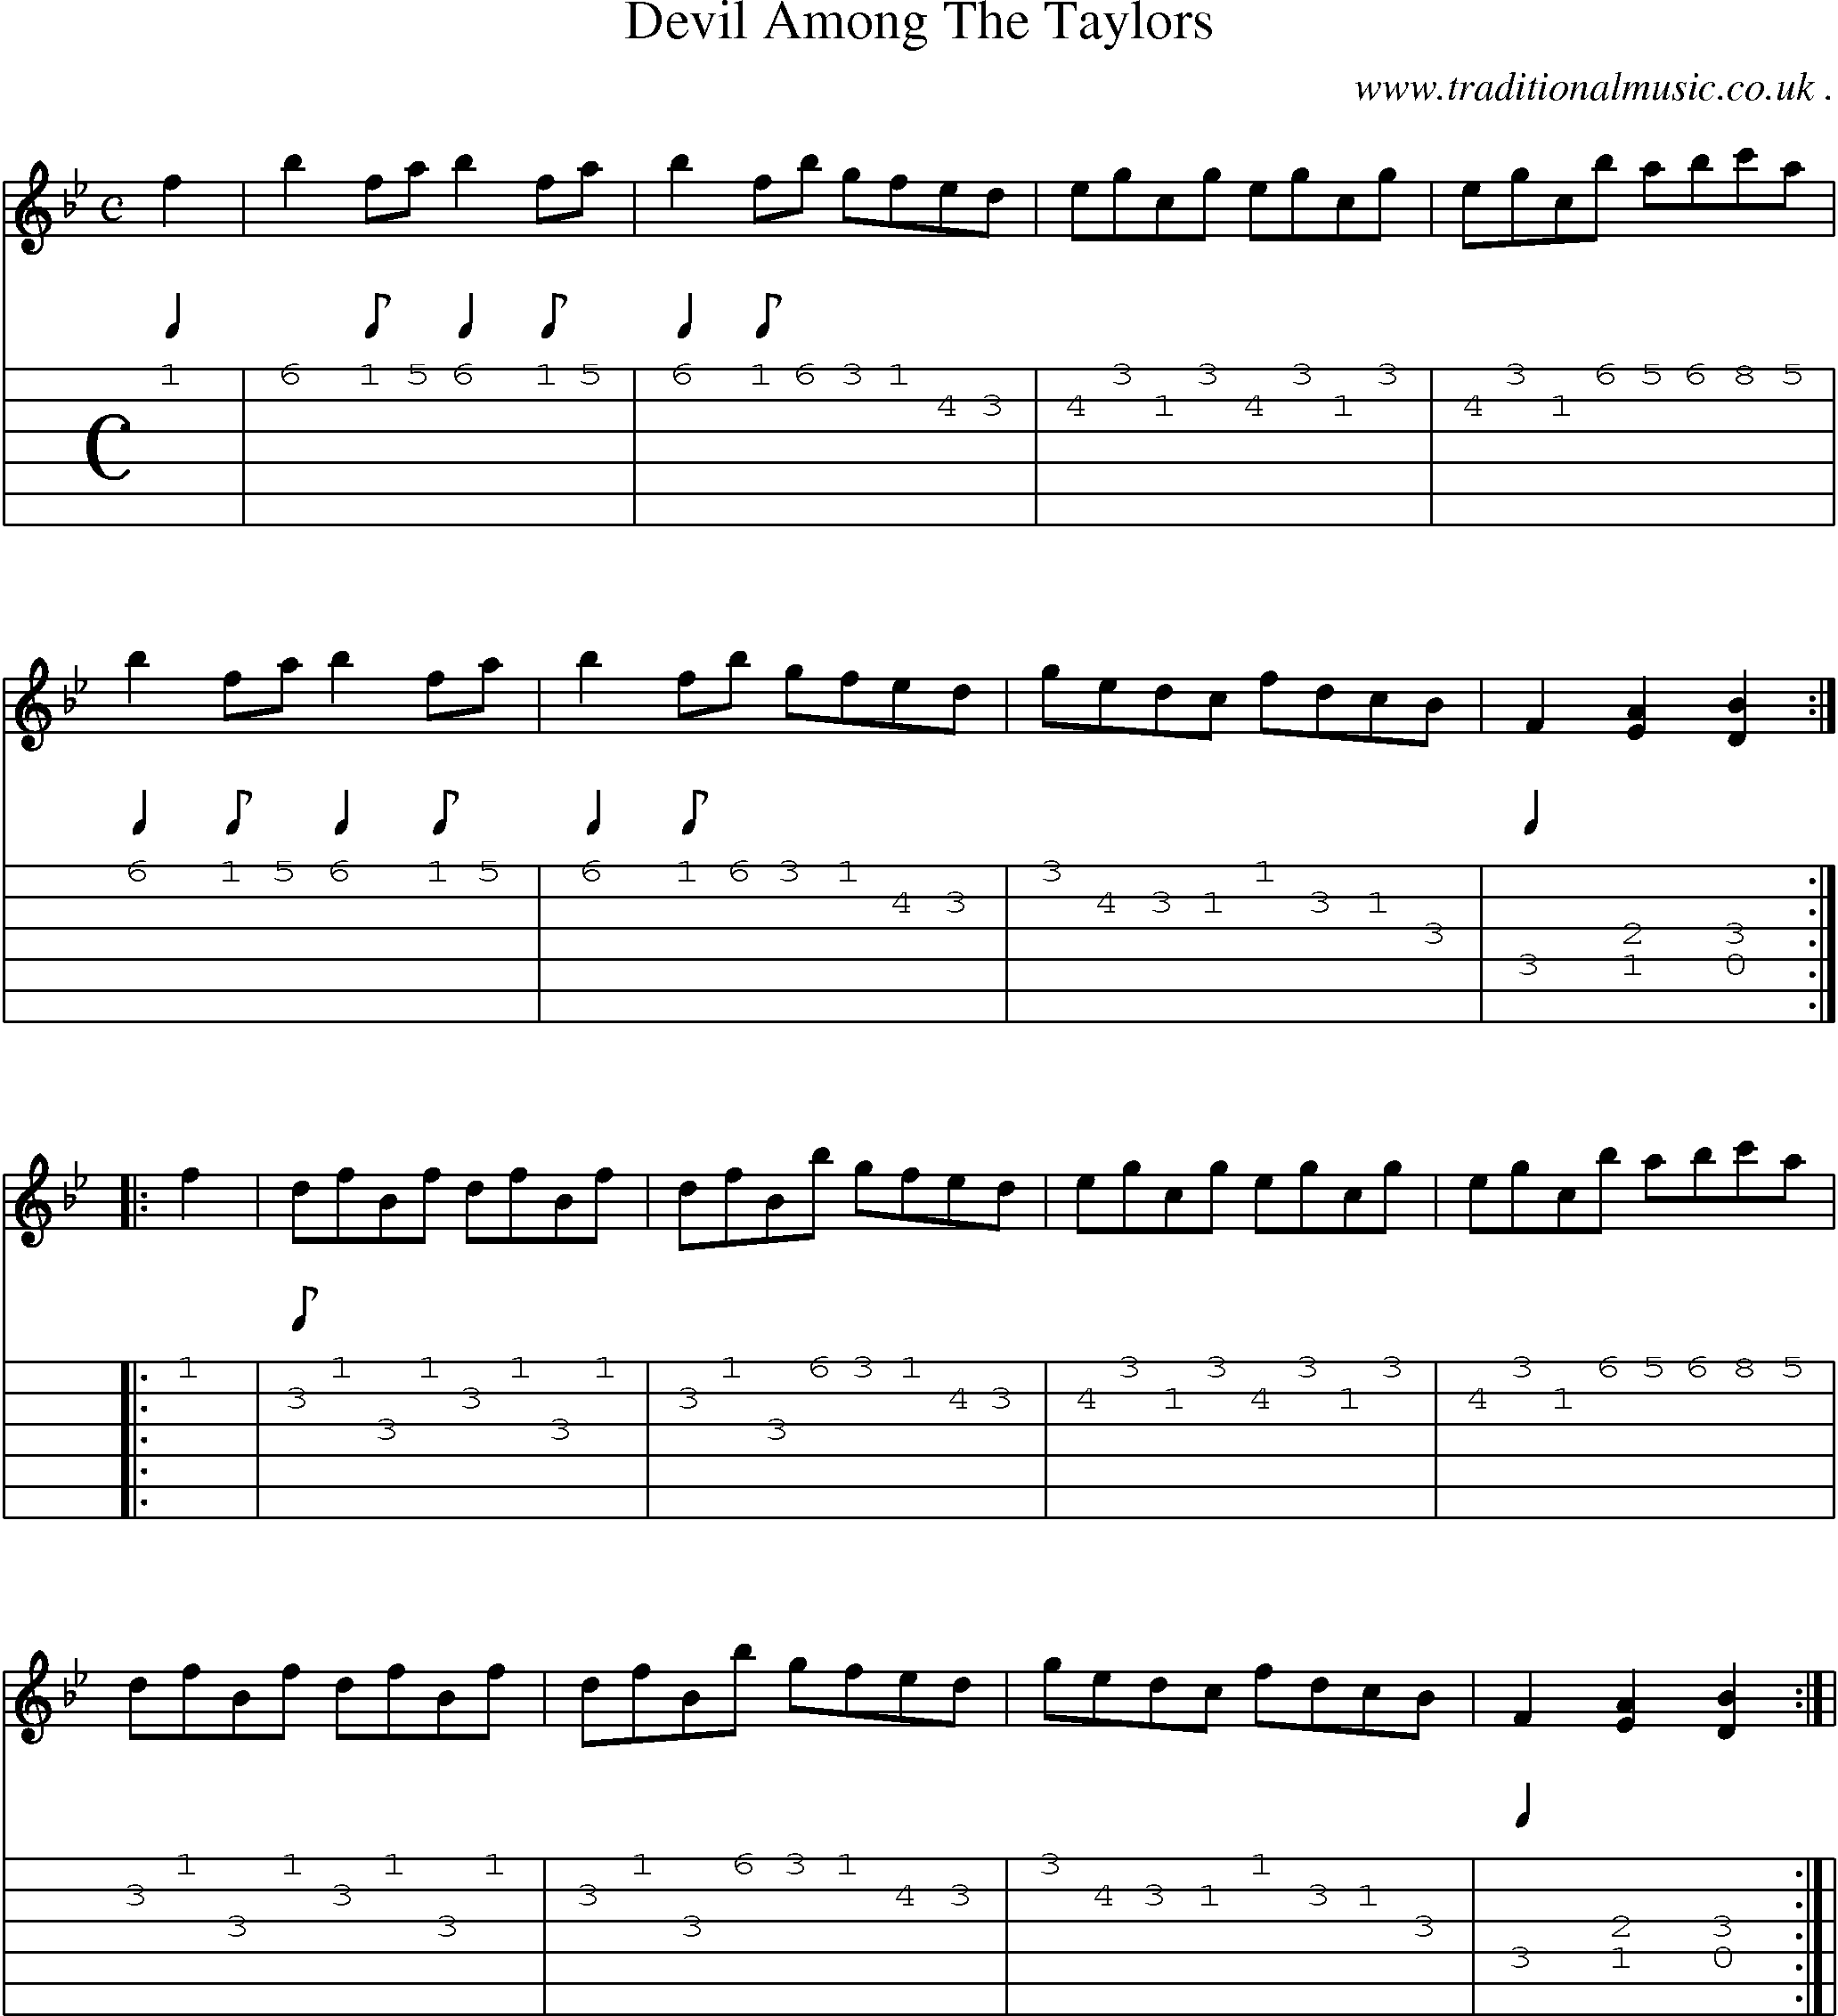 Sheet-Music and Guitar Tabs for Devil Among The Taylors